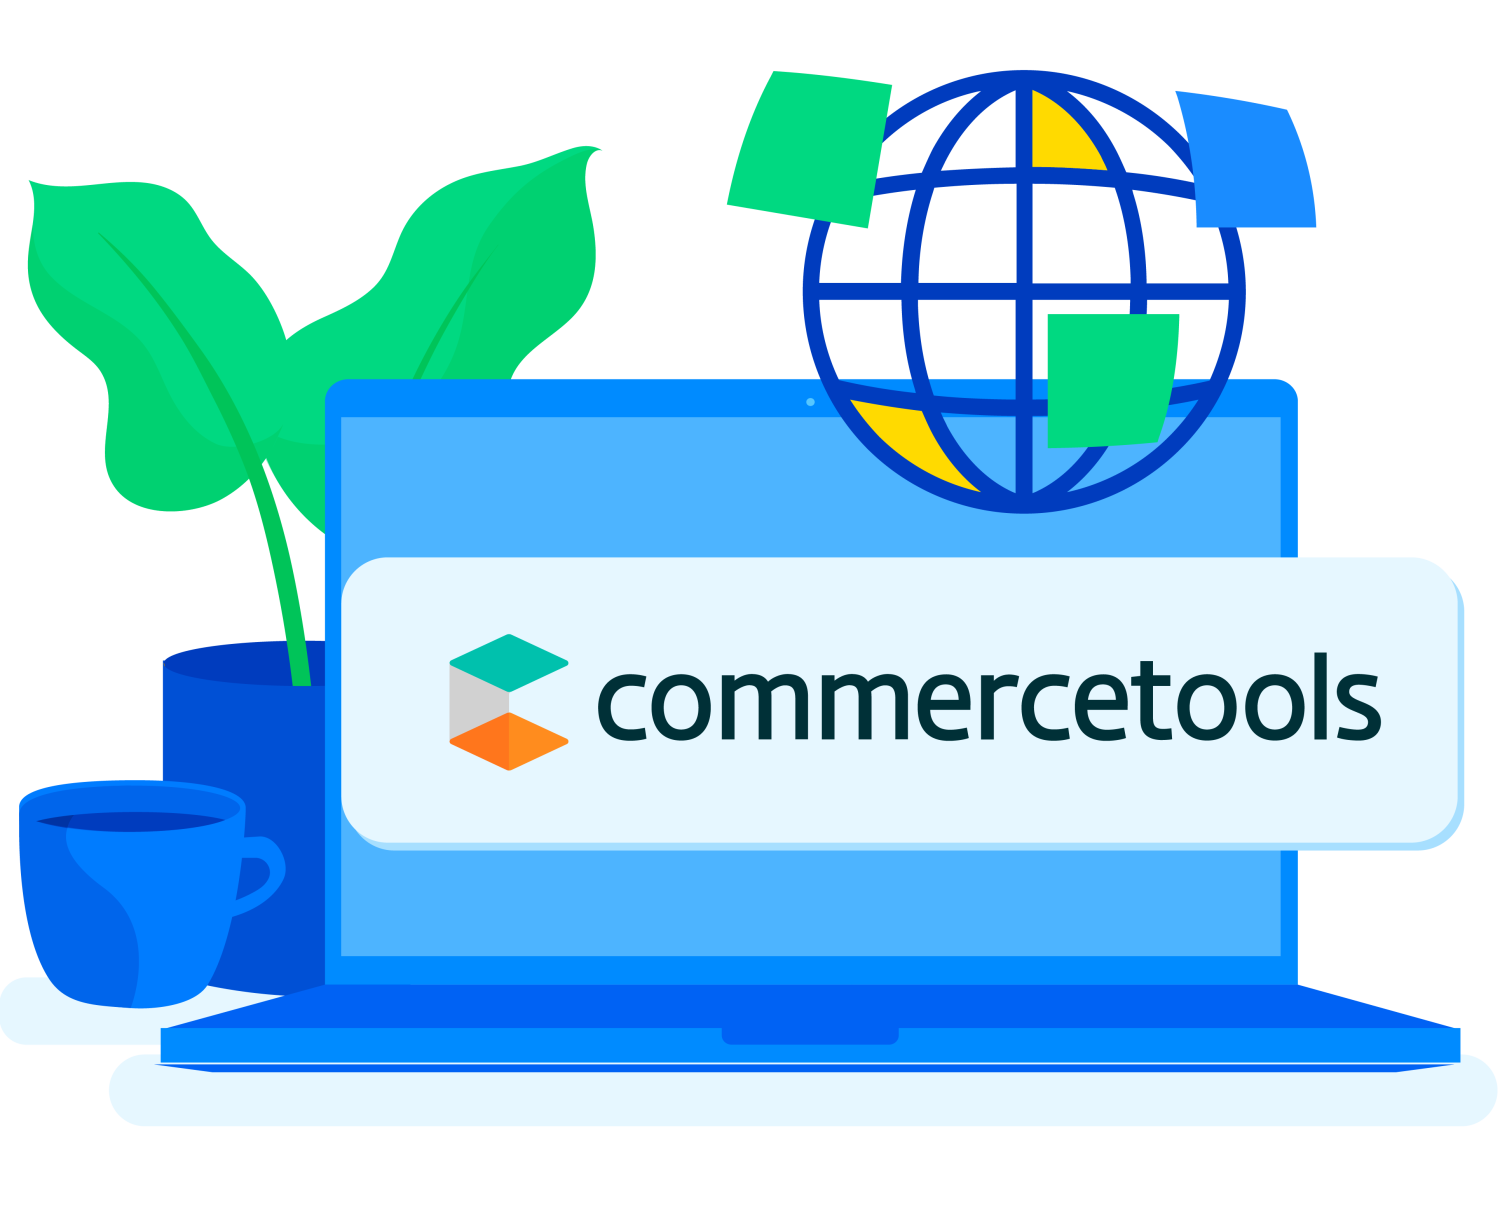 Commerce tools can connect with Contentful through the App Framework